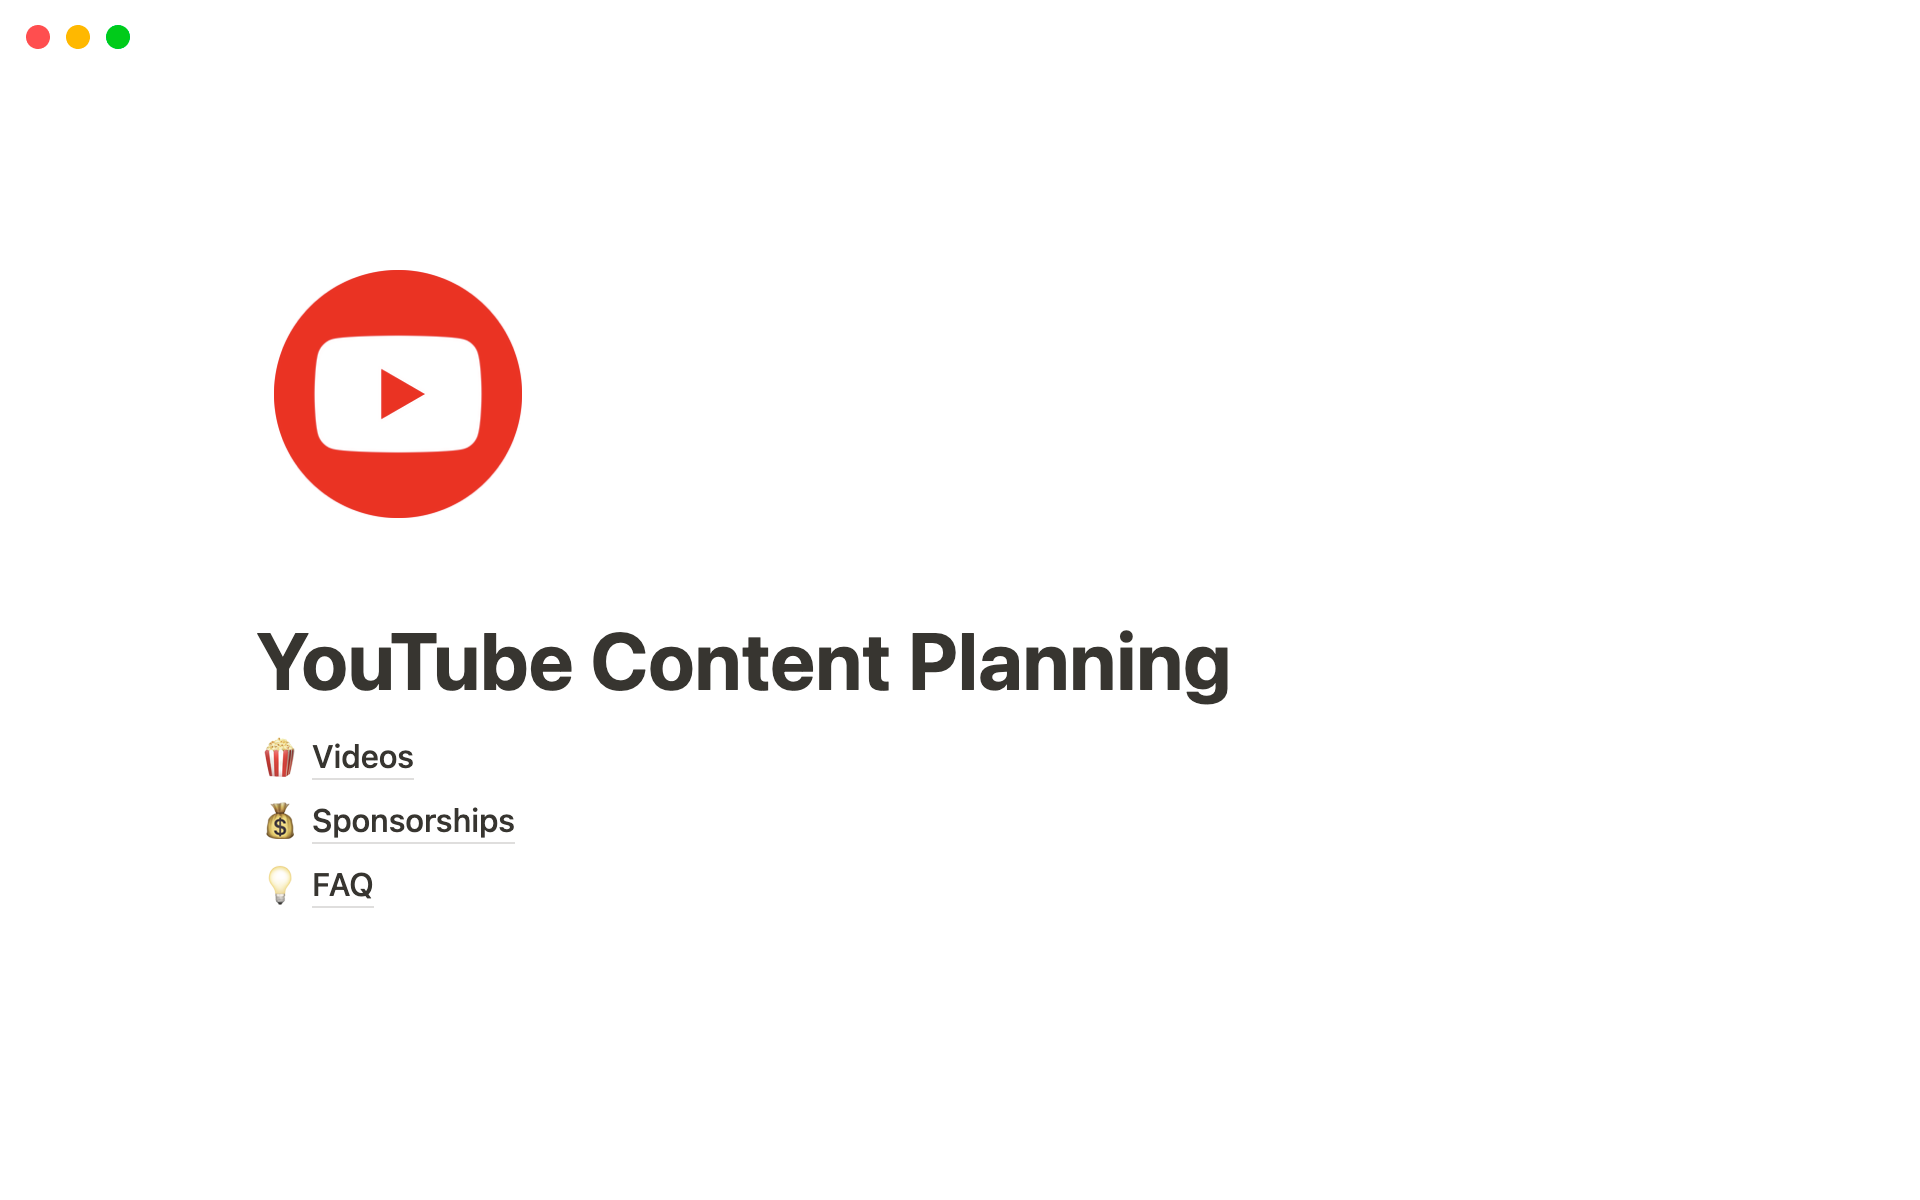 Start working efficiently on your YouTube video content planning!